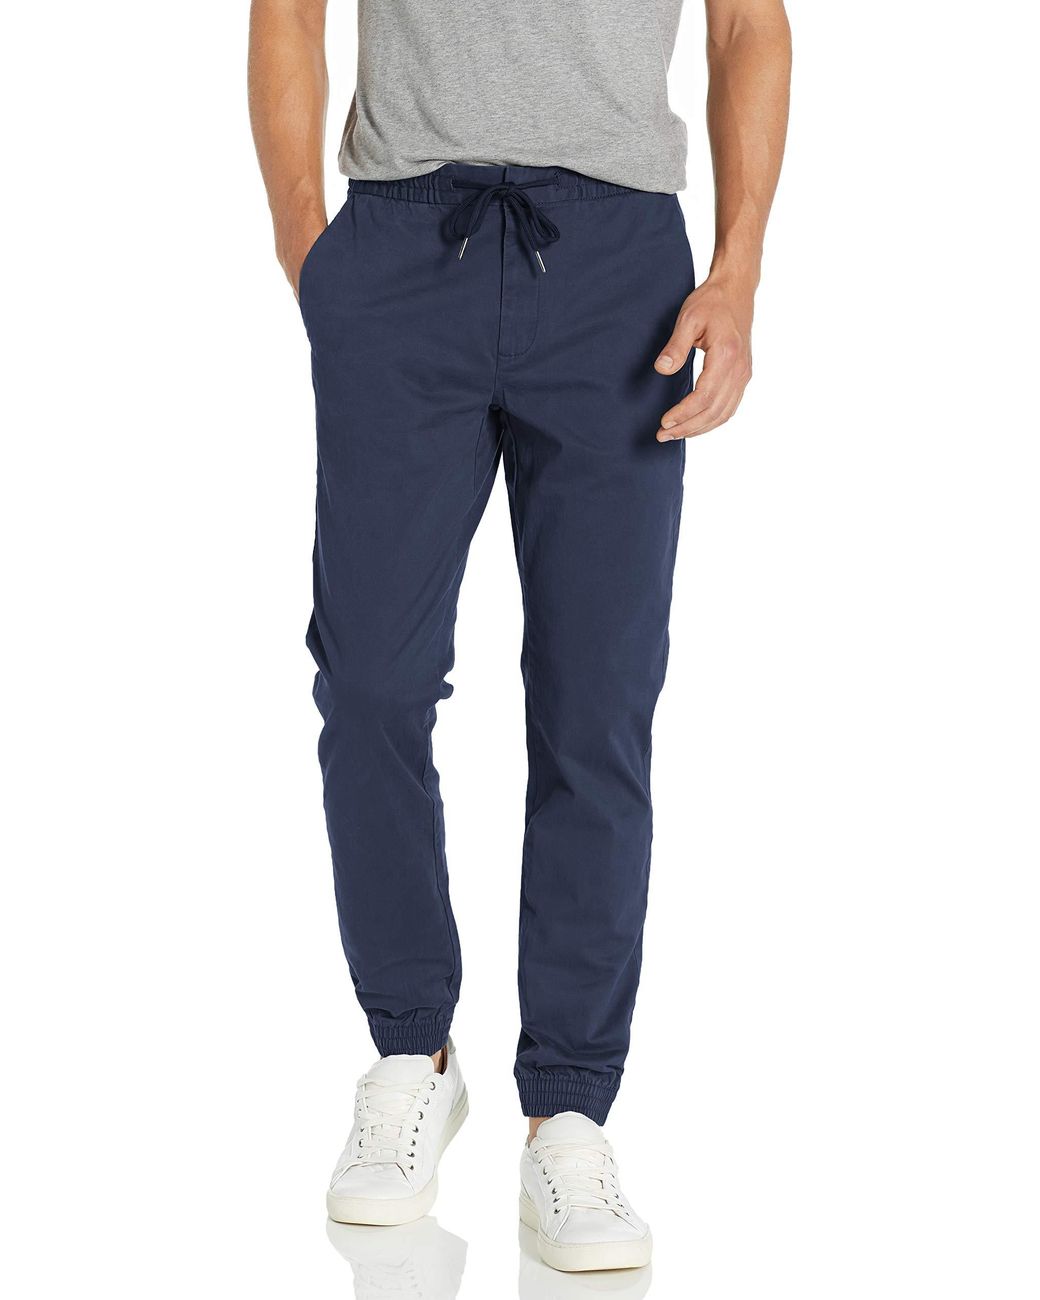 Goodthreads Synthetic Athletic-fit Jogger in Navy (Blue) for Men - Lyst